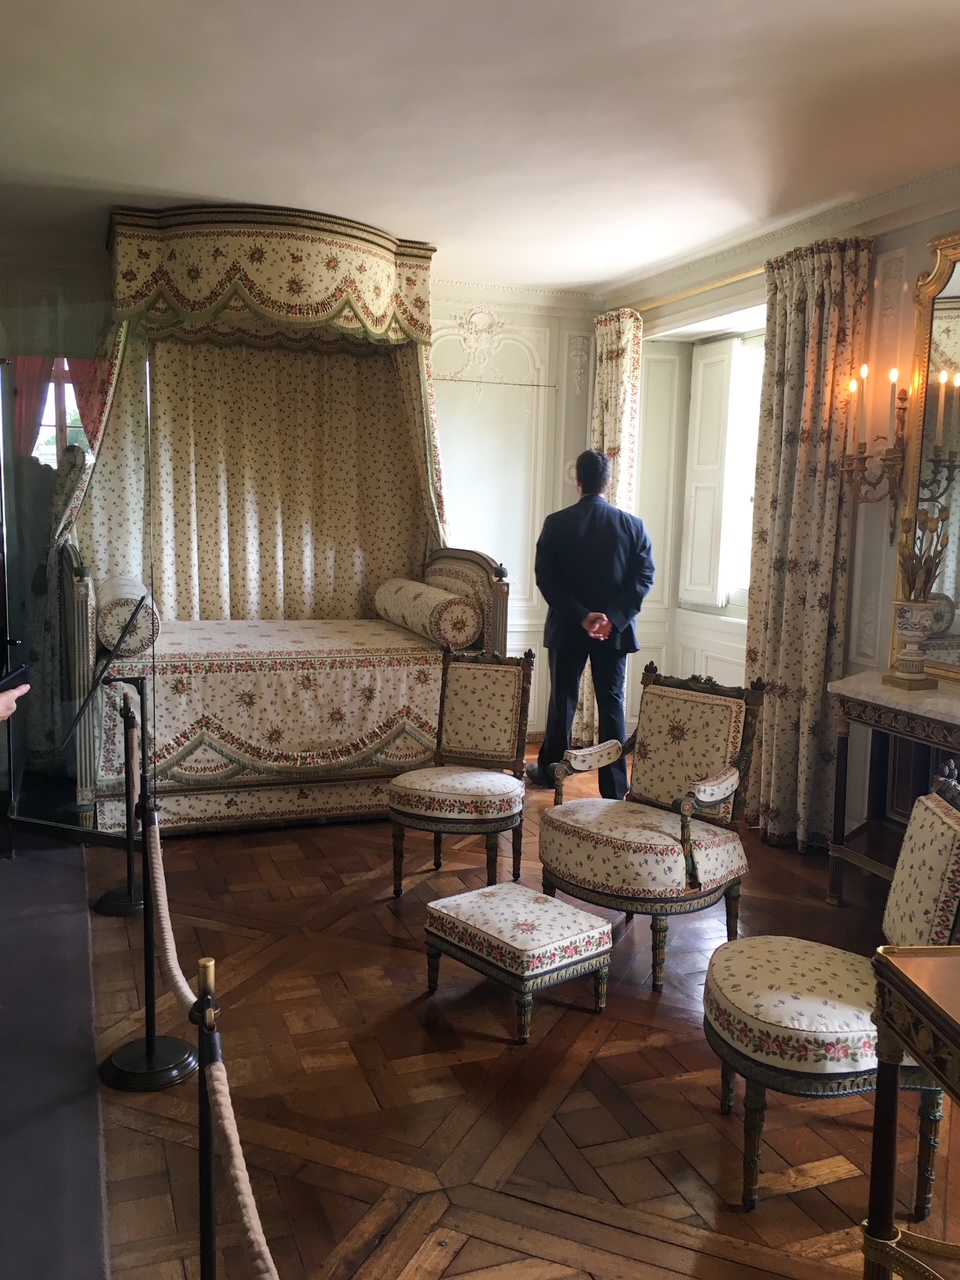 Marie Antoinette's bedroom at the Petit Trianon